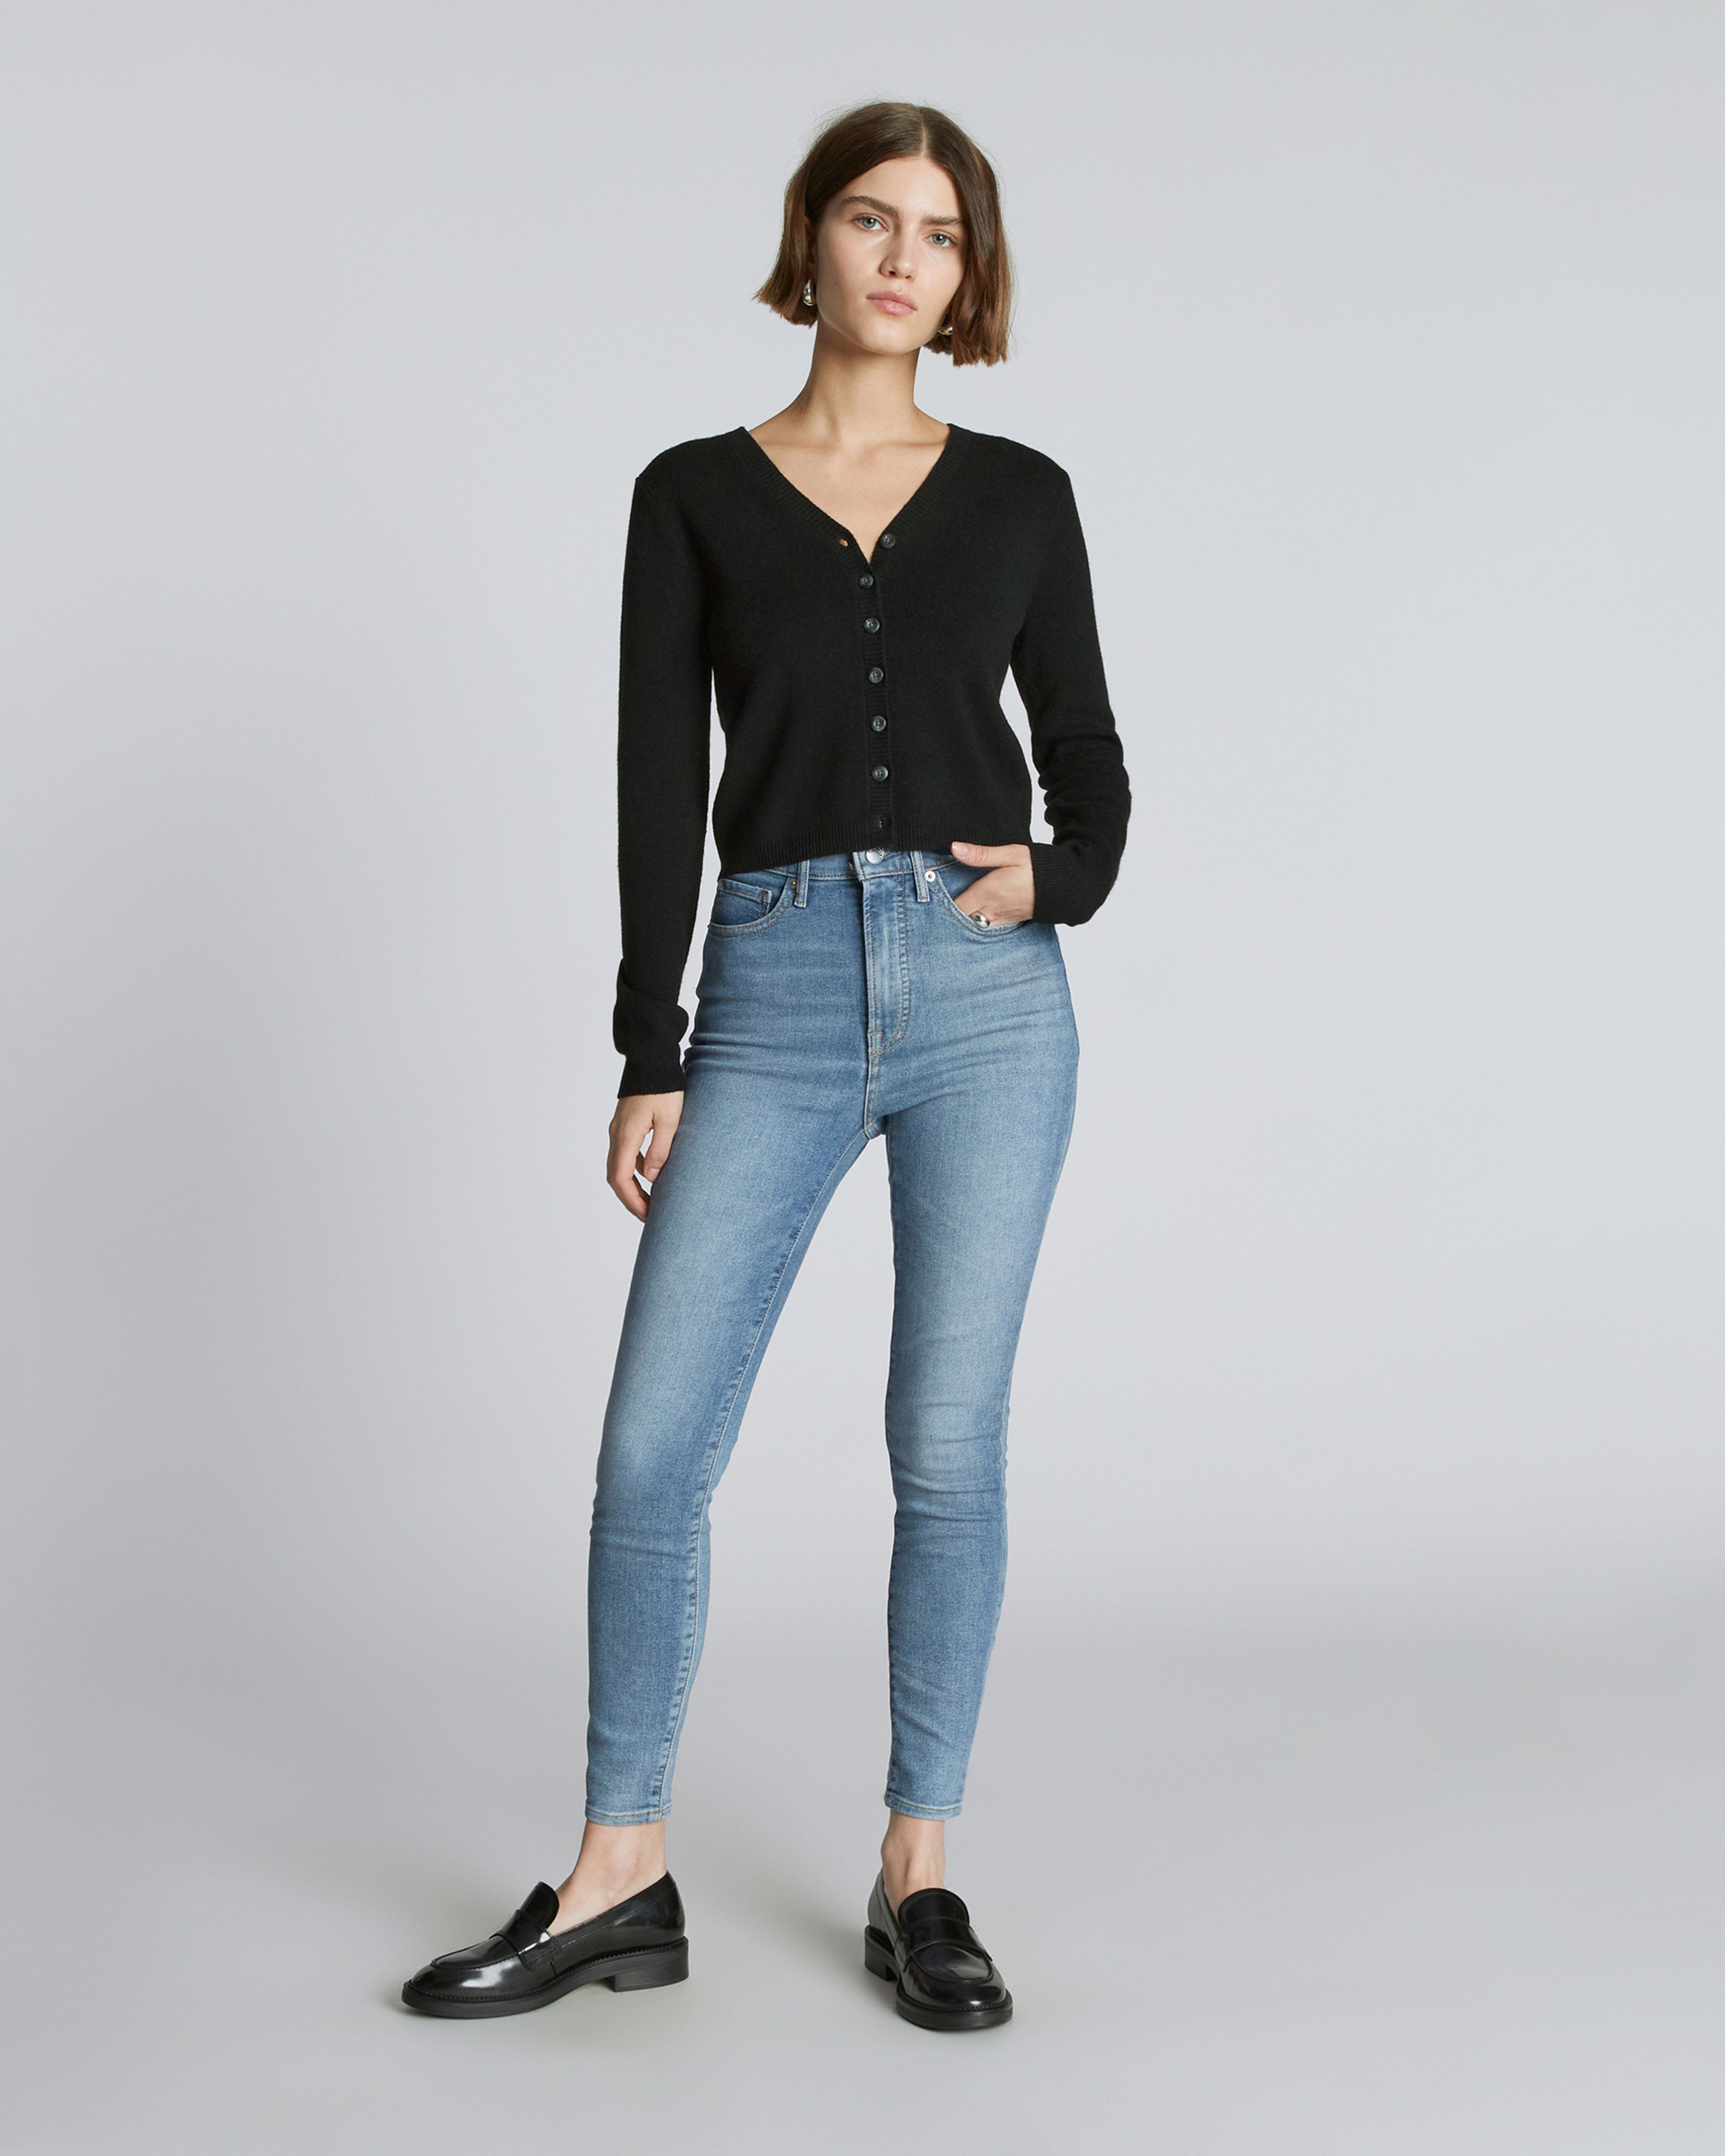 The 23 Best Long Jeans for Women That Are So Flattering